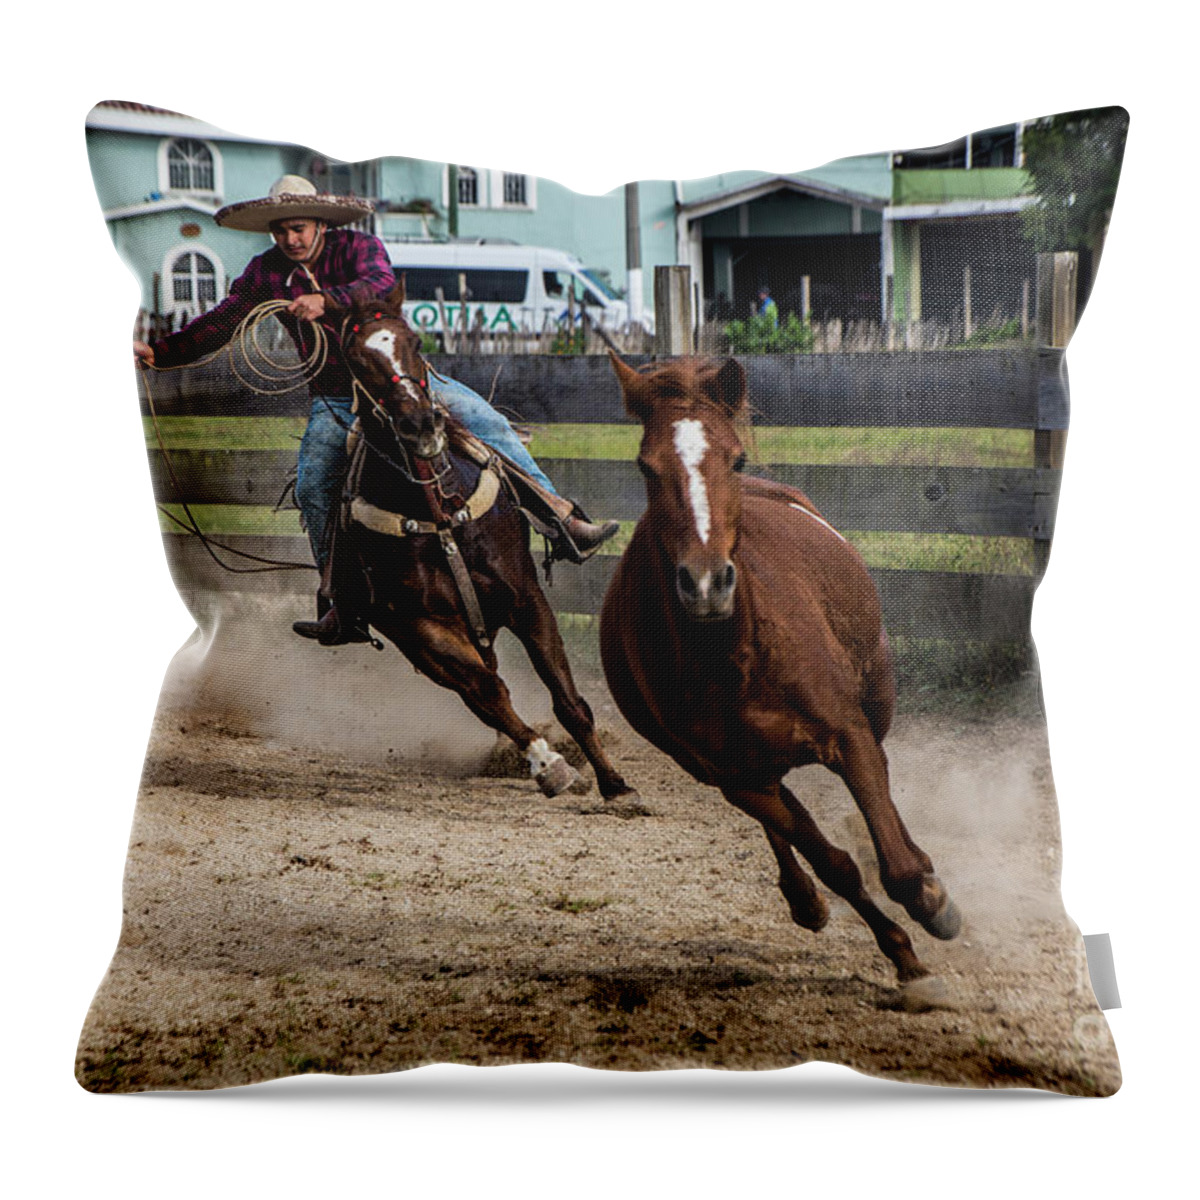 Chiapas Throw Pillow featuring the photograph I'll Get You by Kathy McClure